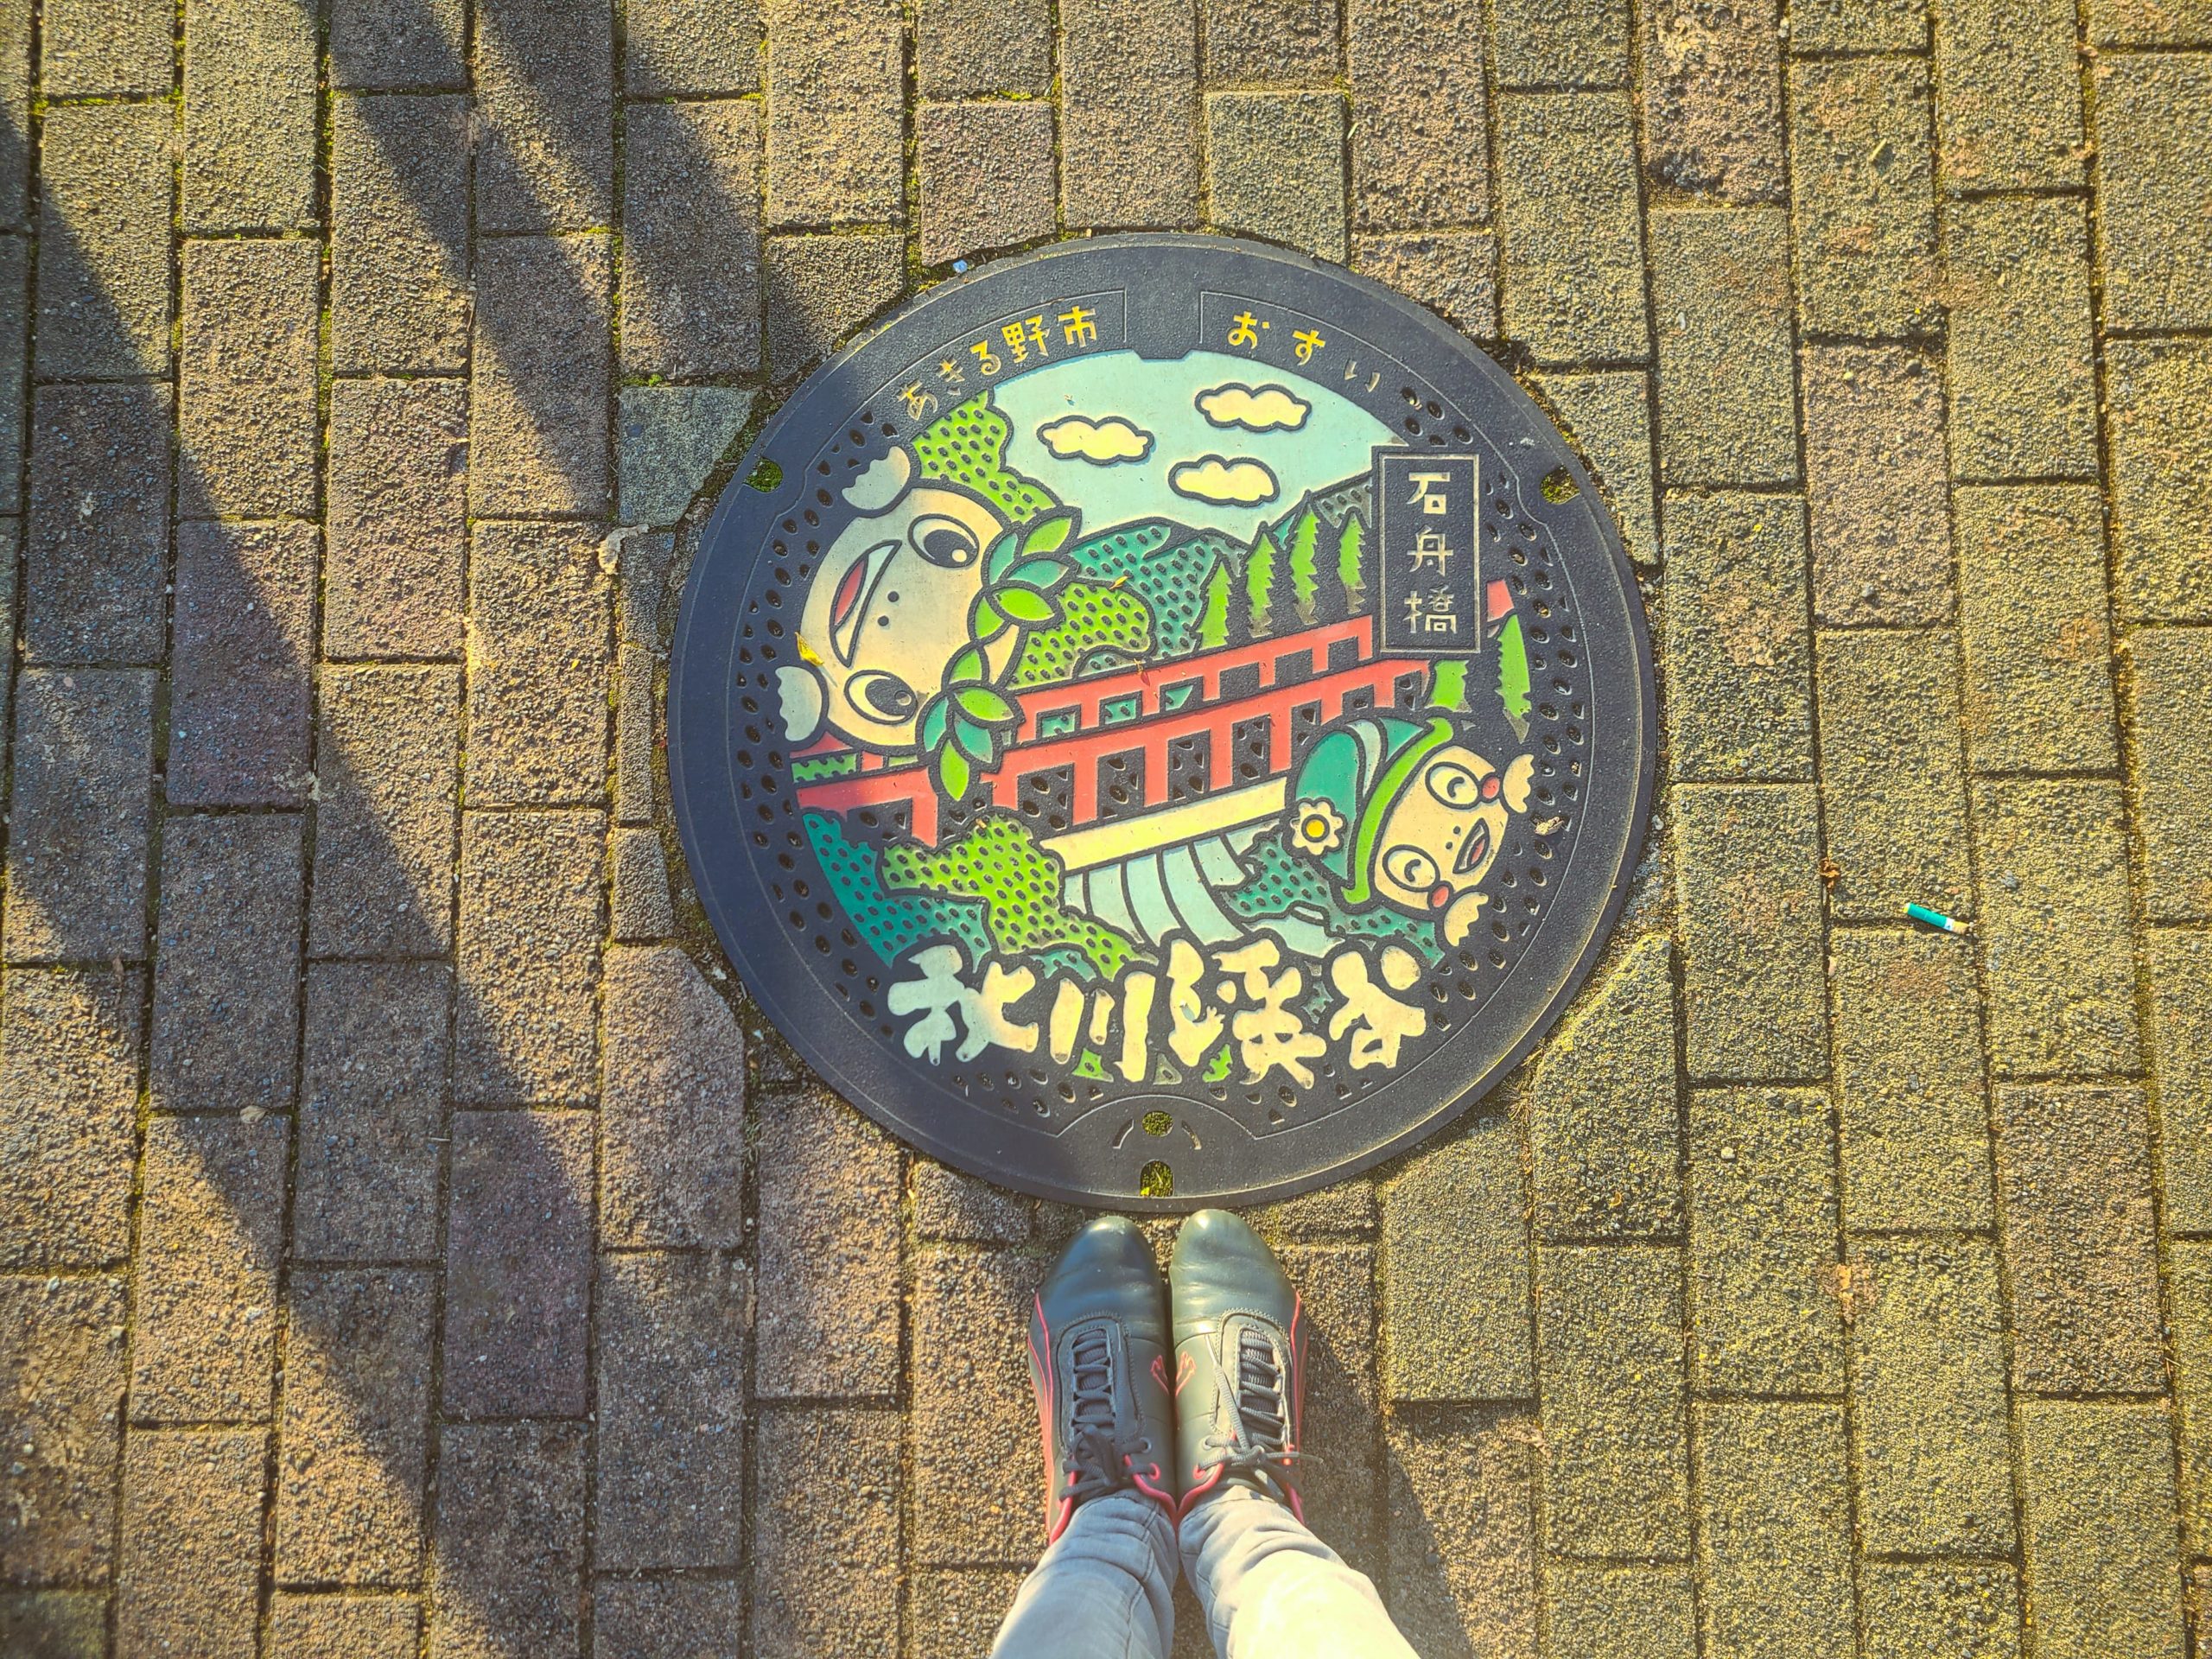 A colorful manhole I encounter on my way to the meat shop